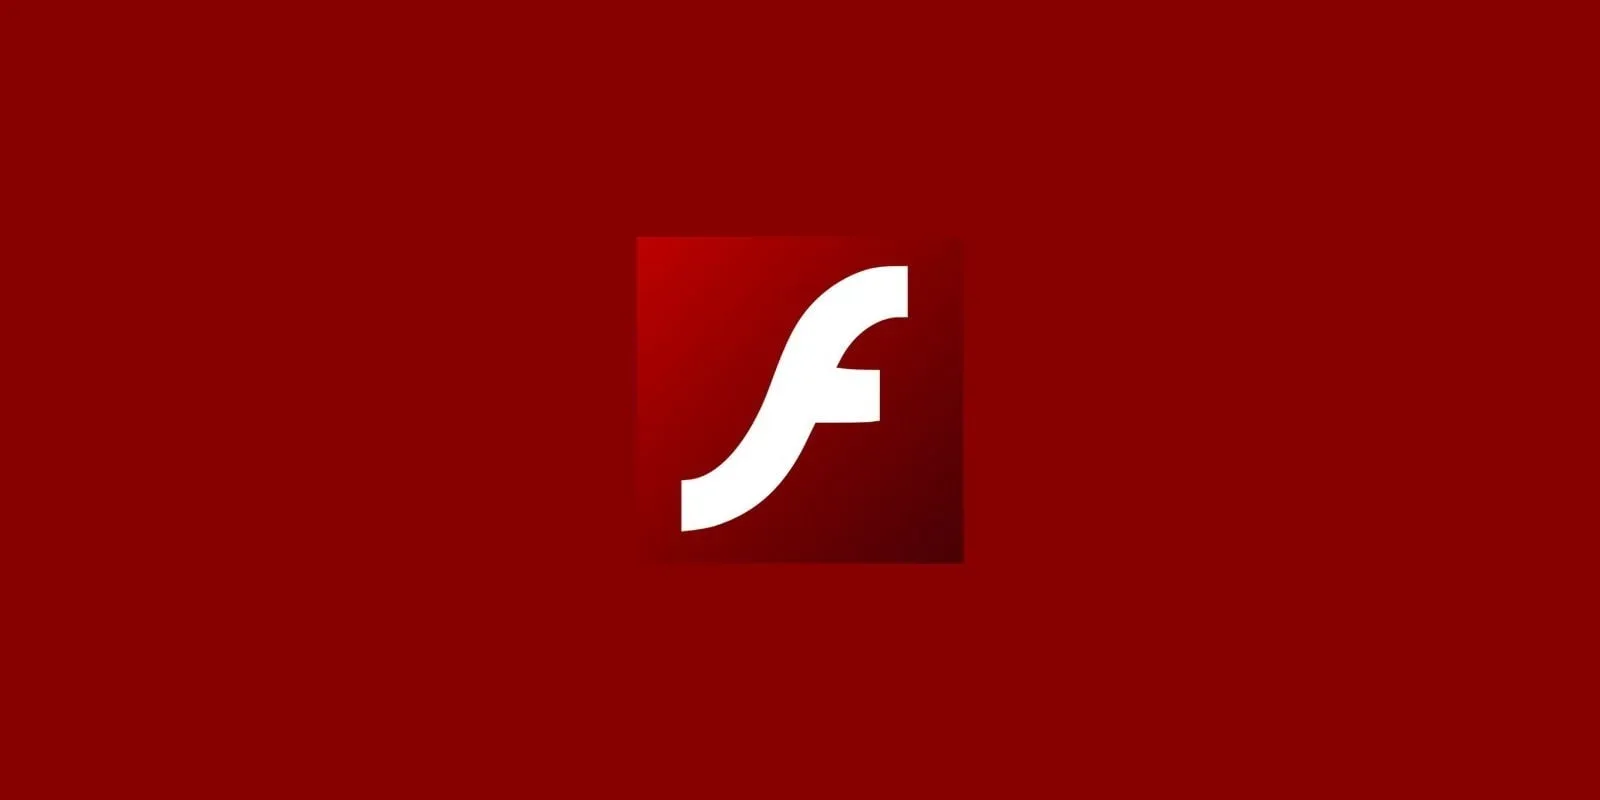 Adobe Flash Player Goes Eol This December